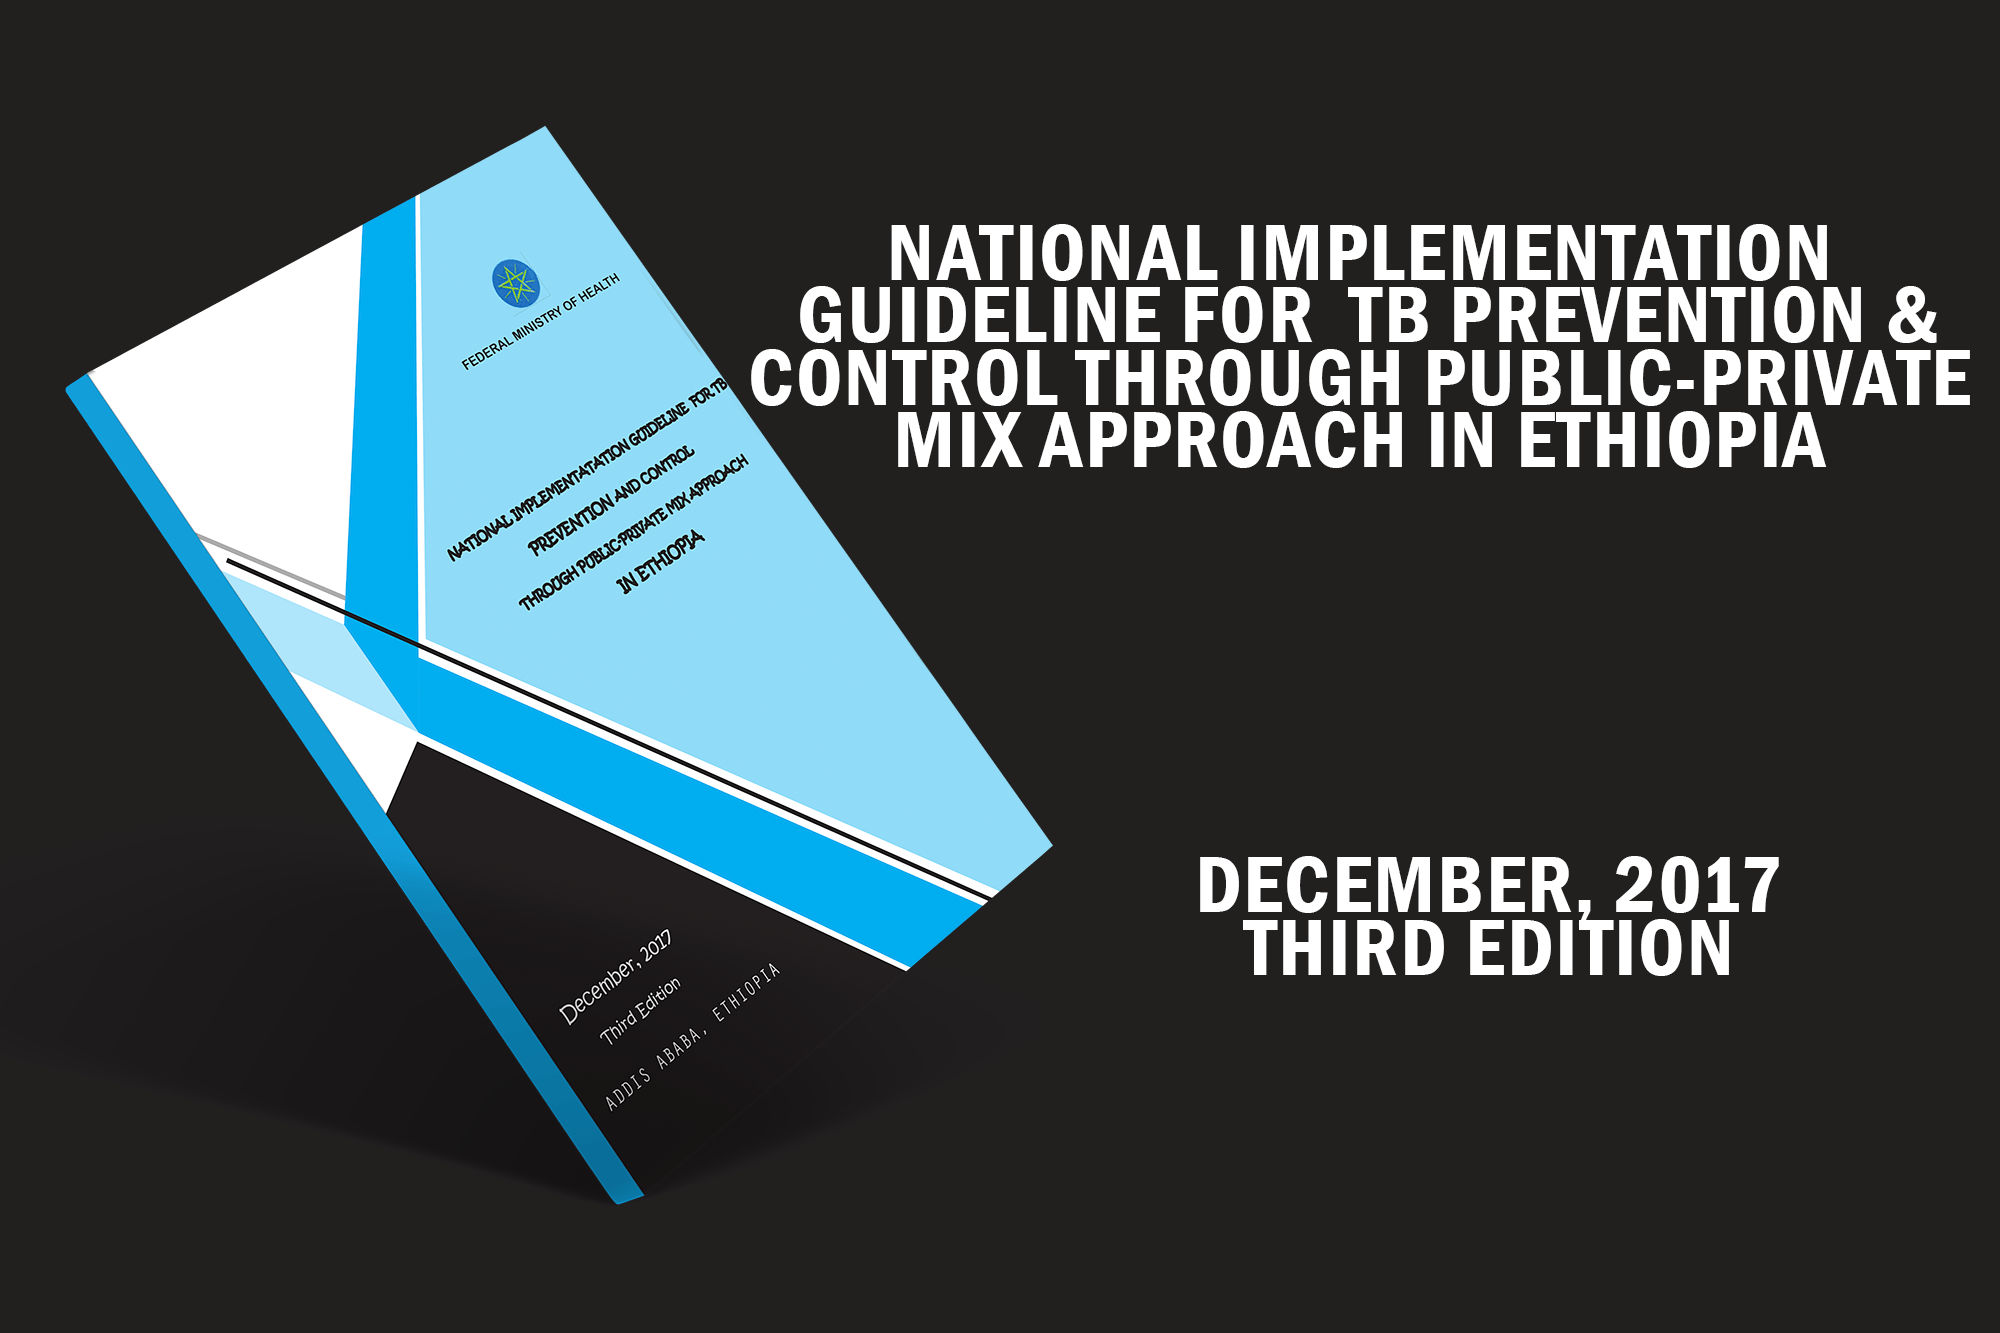 National Implementation Guideline for TB Prevention & Control through Public-Private Mix Approach in Ethiopia